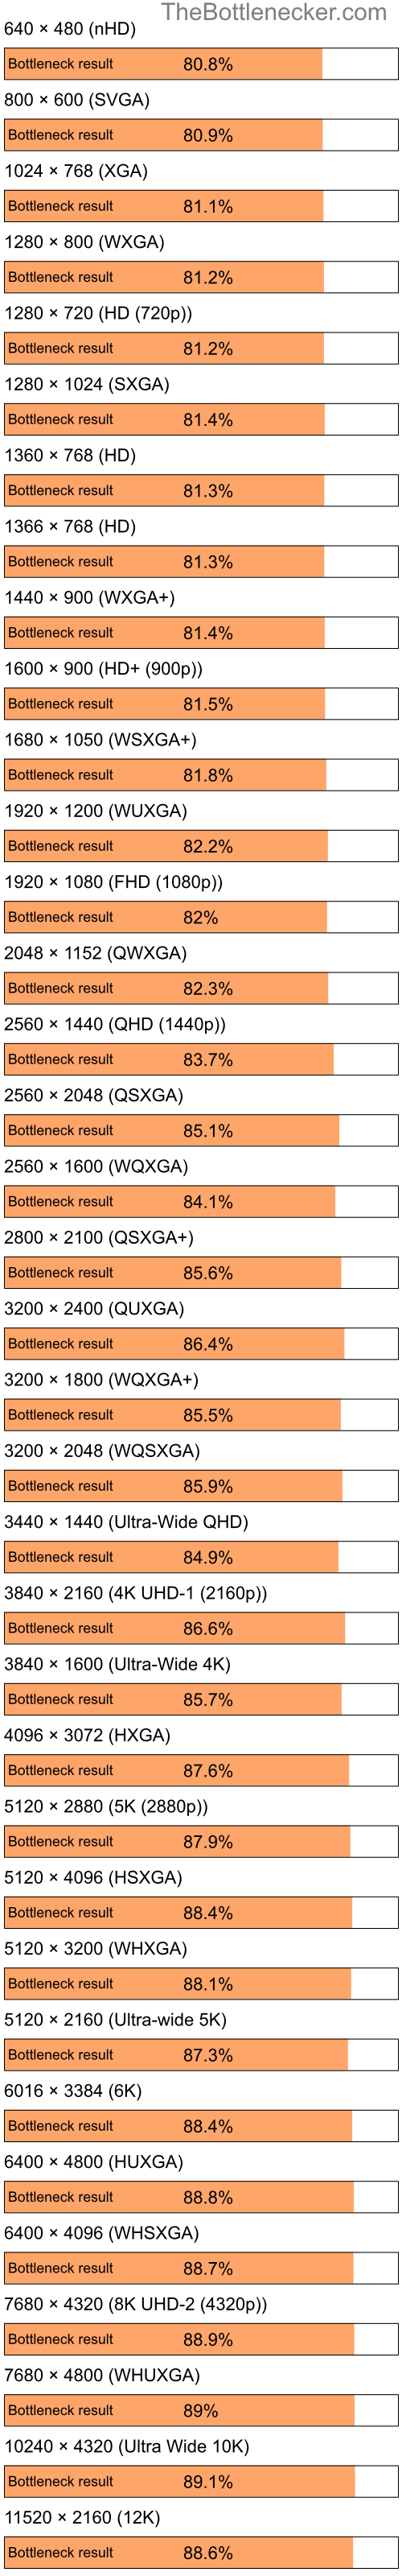 Bottleneck results by resolution for Intel Atom N280 and AMD Radeon 9600SE in7 Days to Die